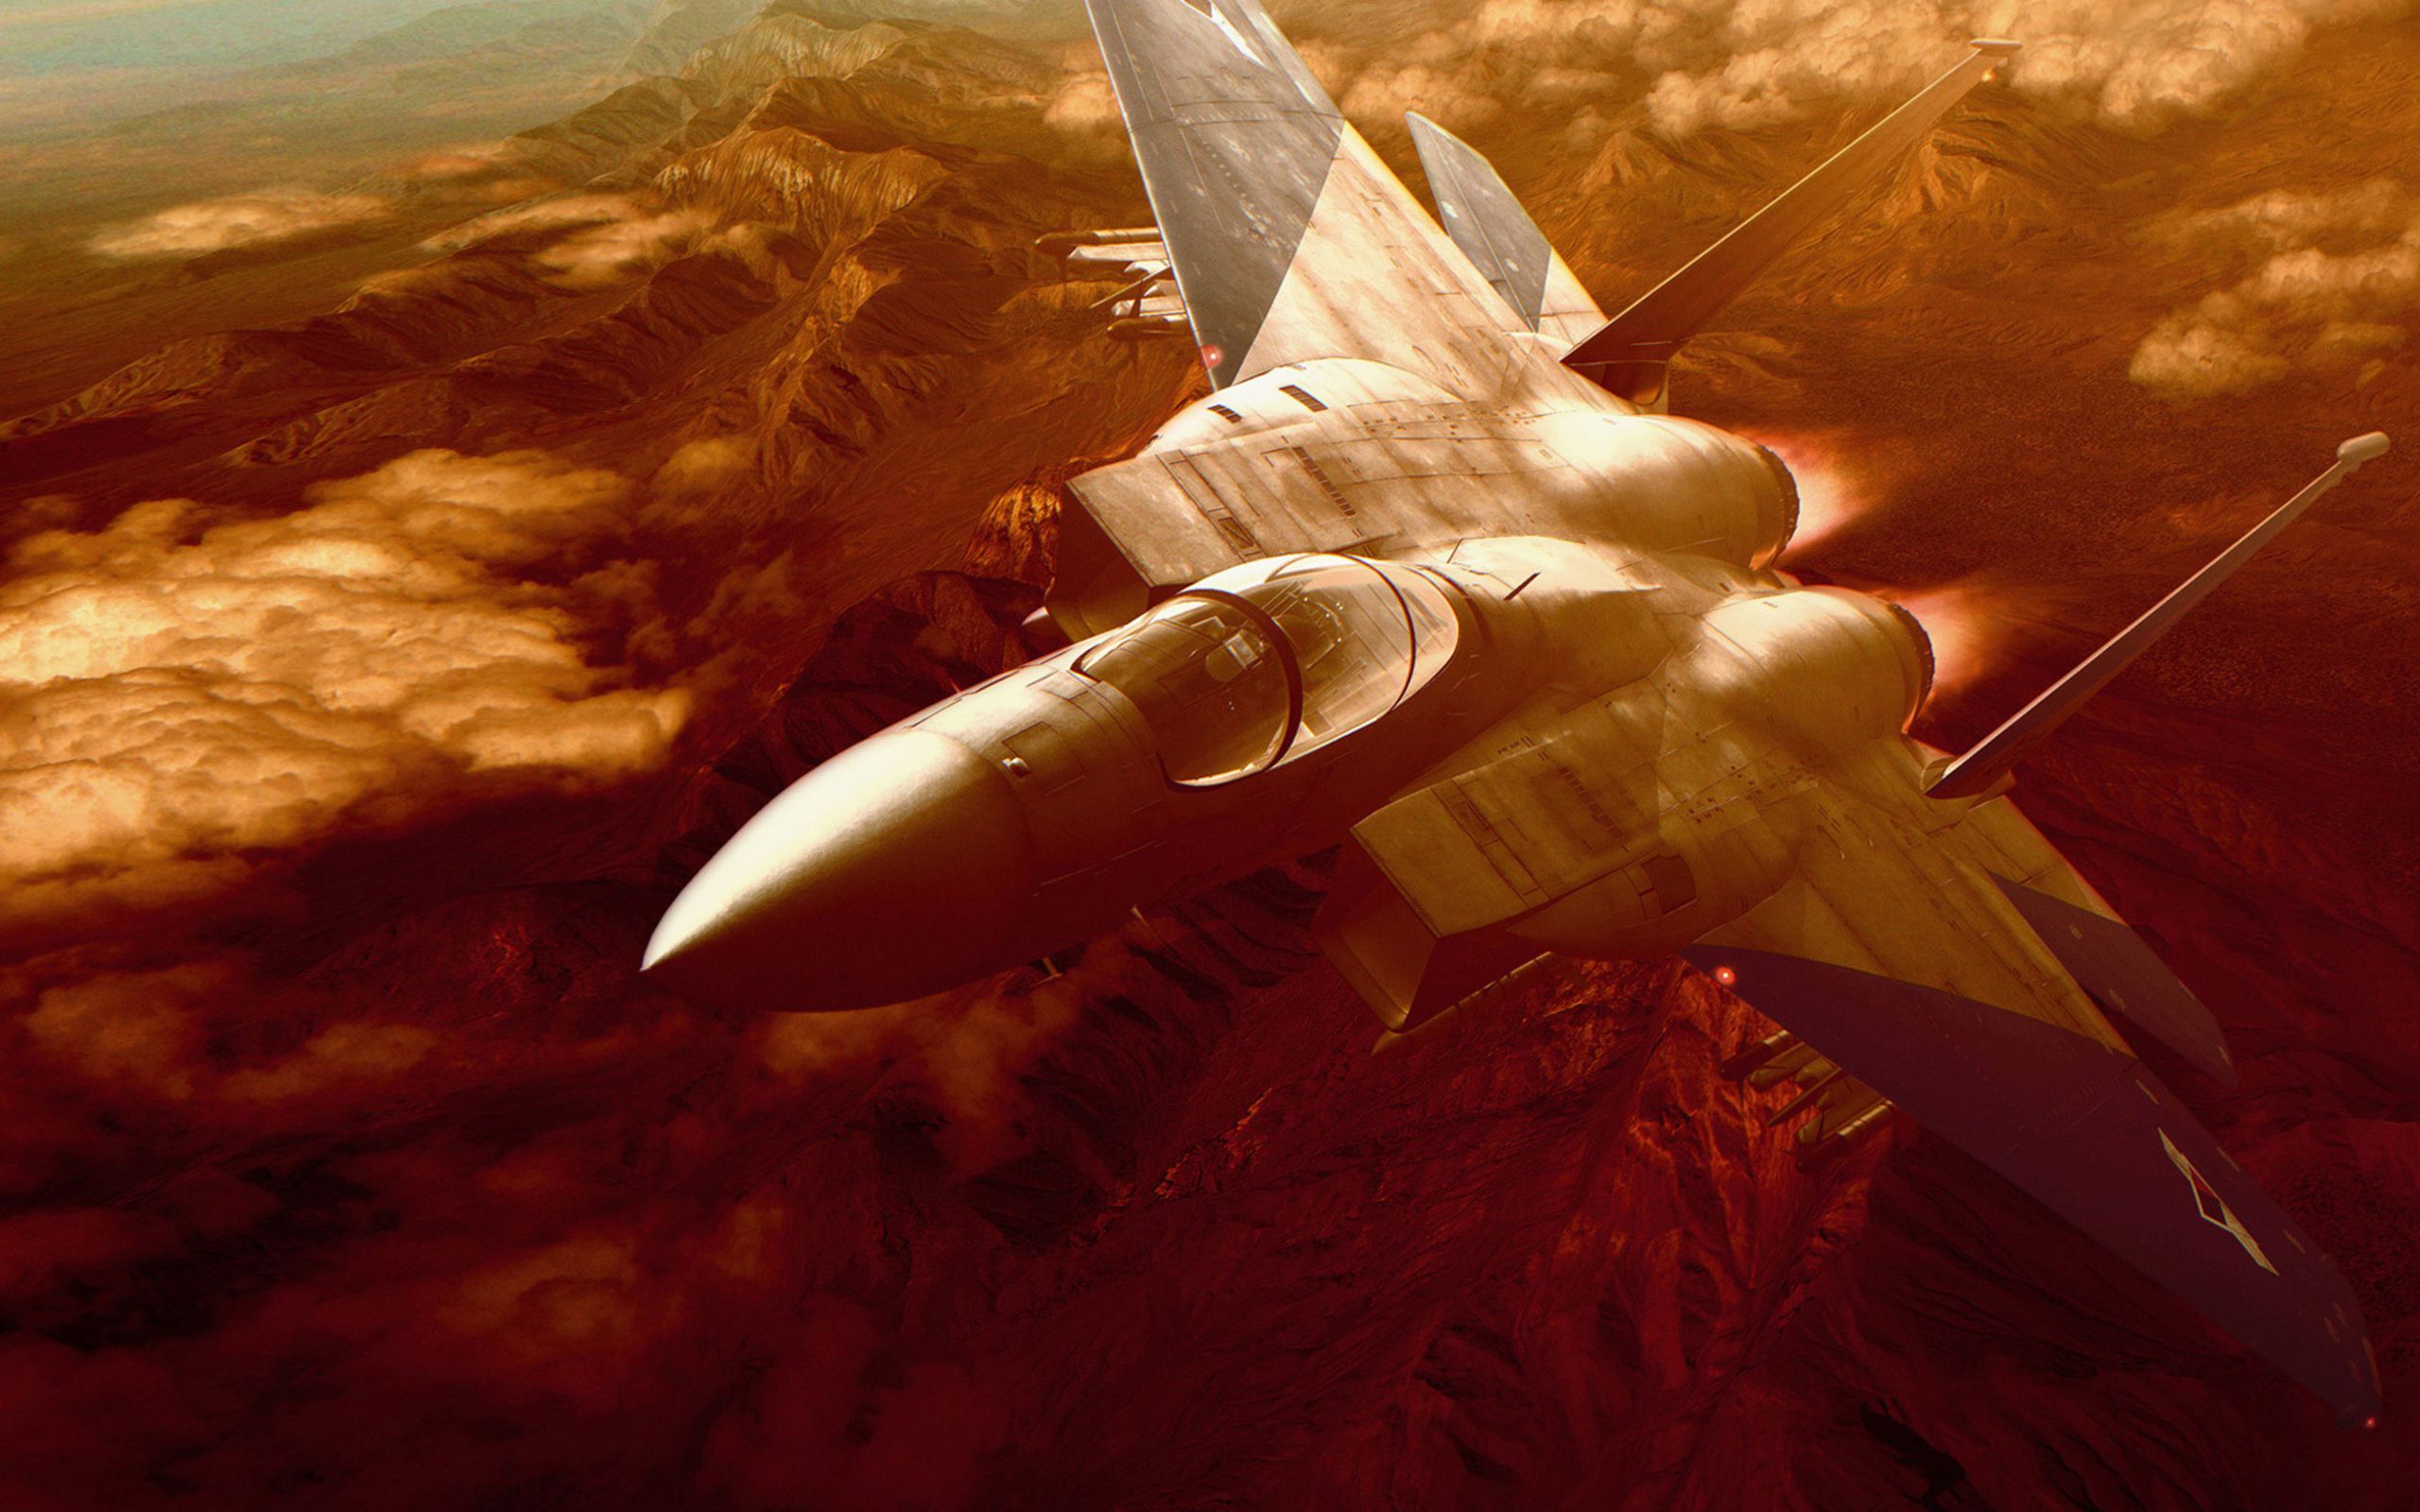 ace, Combat, Game, Jet, Airplane, Aircraft, Fighter, Plane, Military Wallpaper